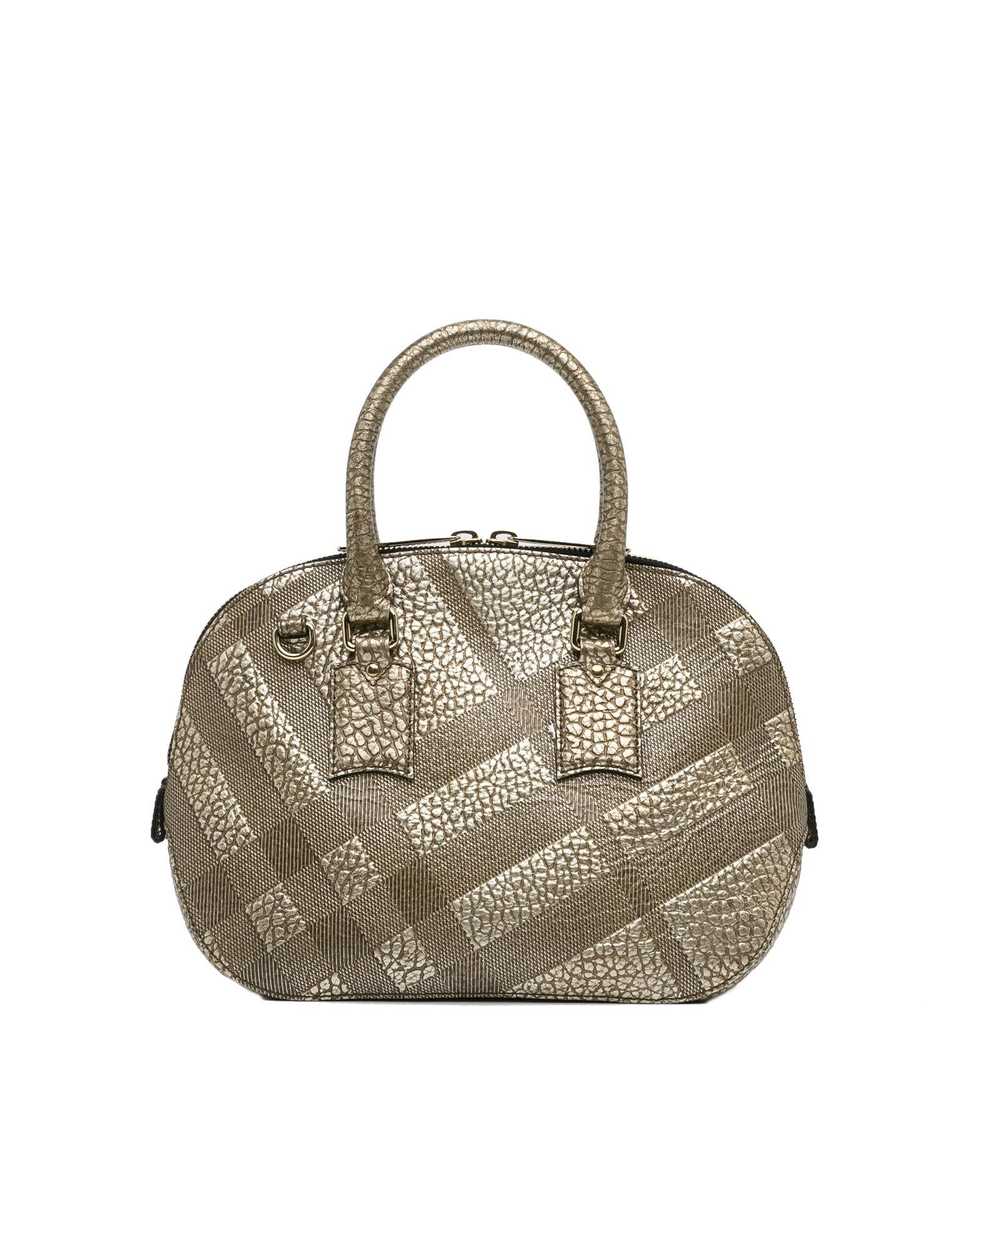 Burberry Grained Leather Orchard Handle Bag - image 3